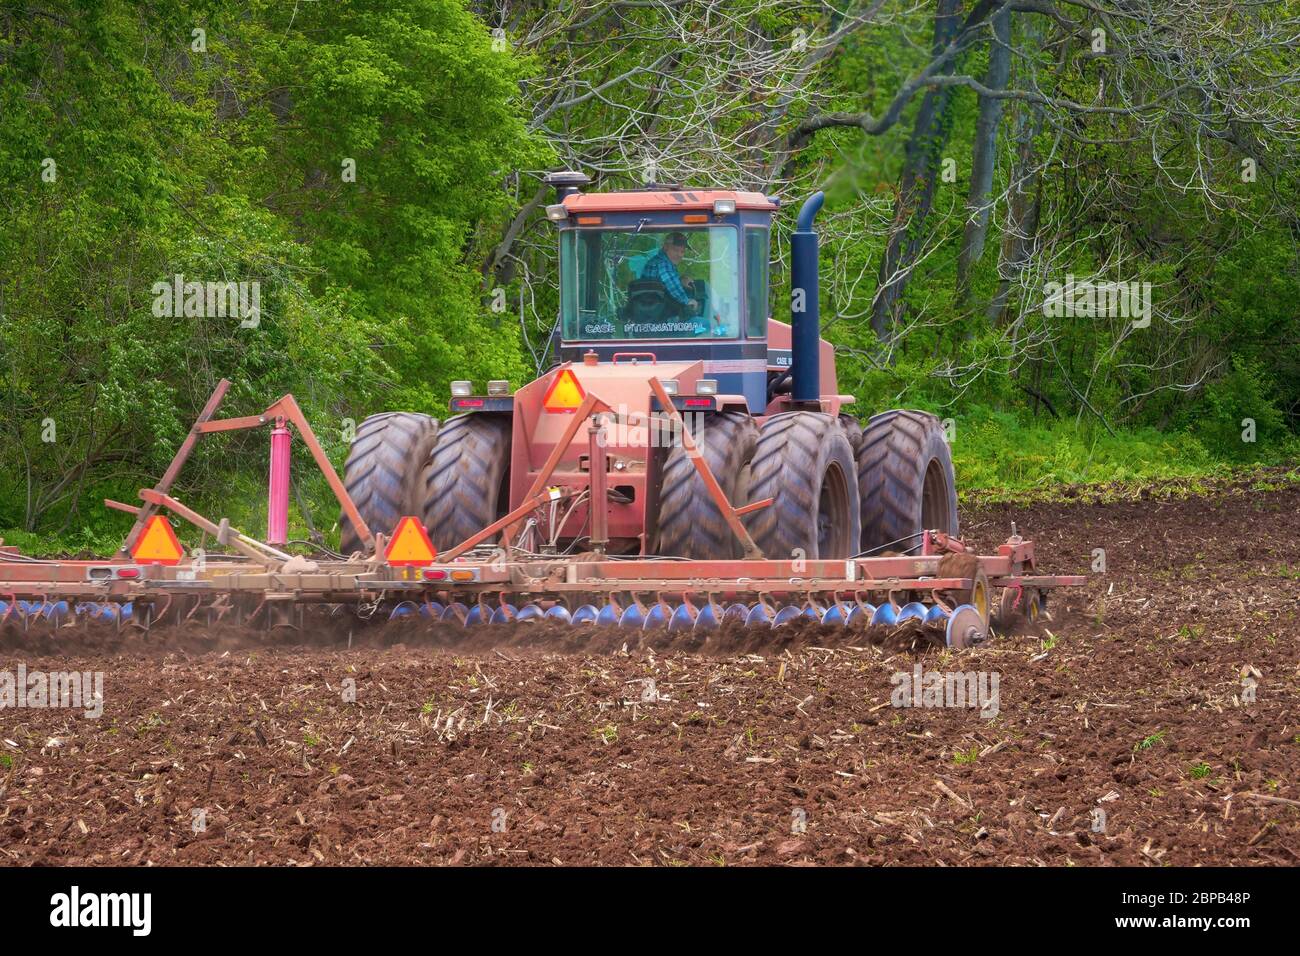 A farmer uses a tractor to disc a field for corn planting May 12, 2020 in Frederick County, Maryland. Stock Photo